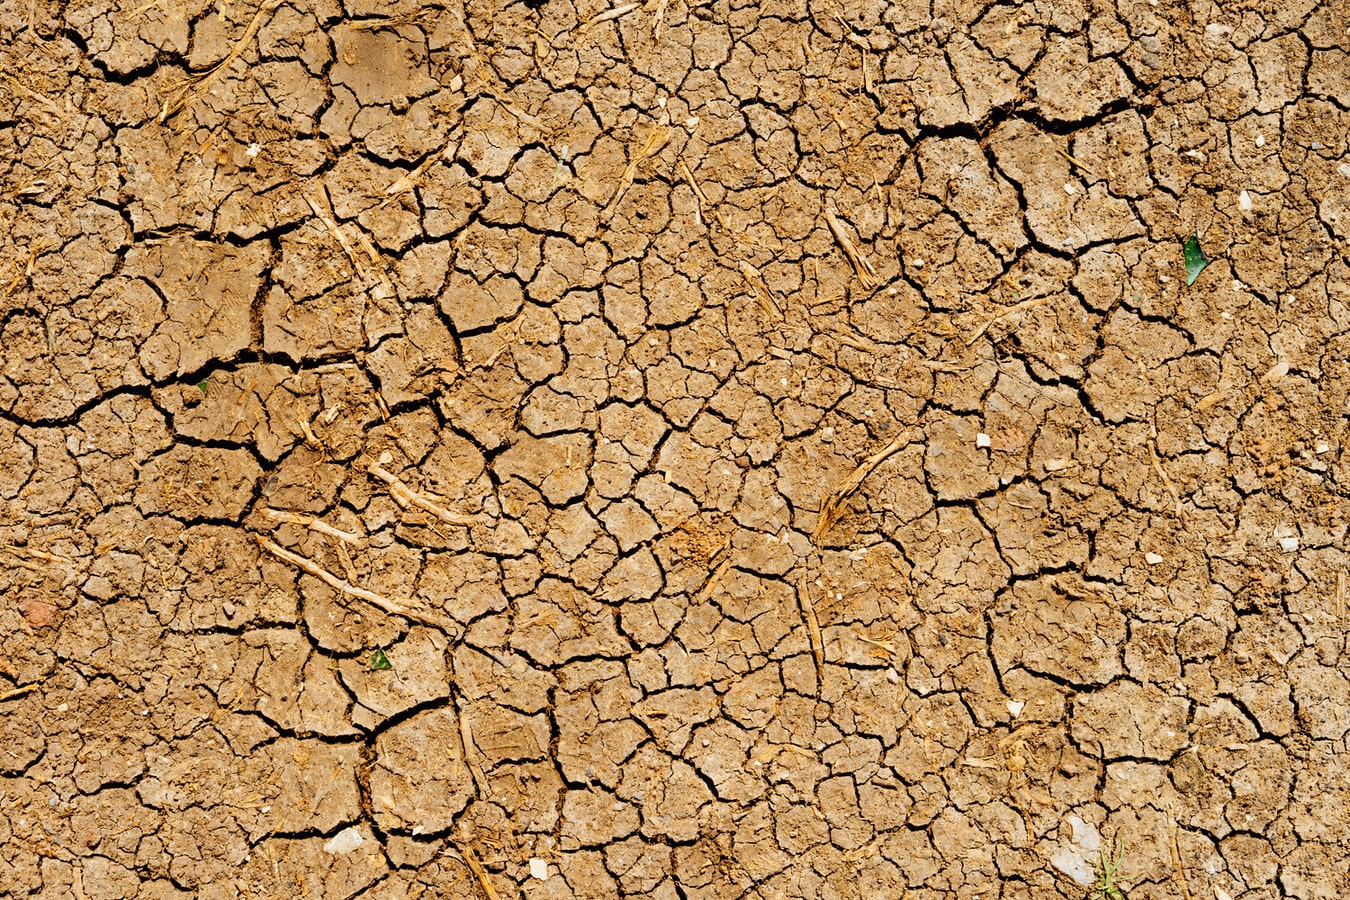 European Union policy for improving drought preparedness and mitigation - The European Sting